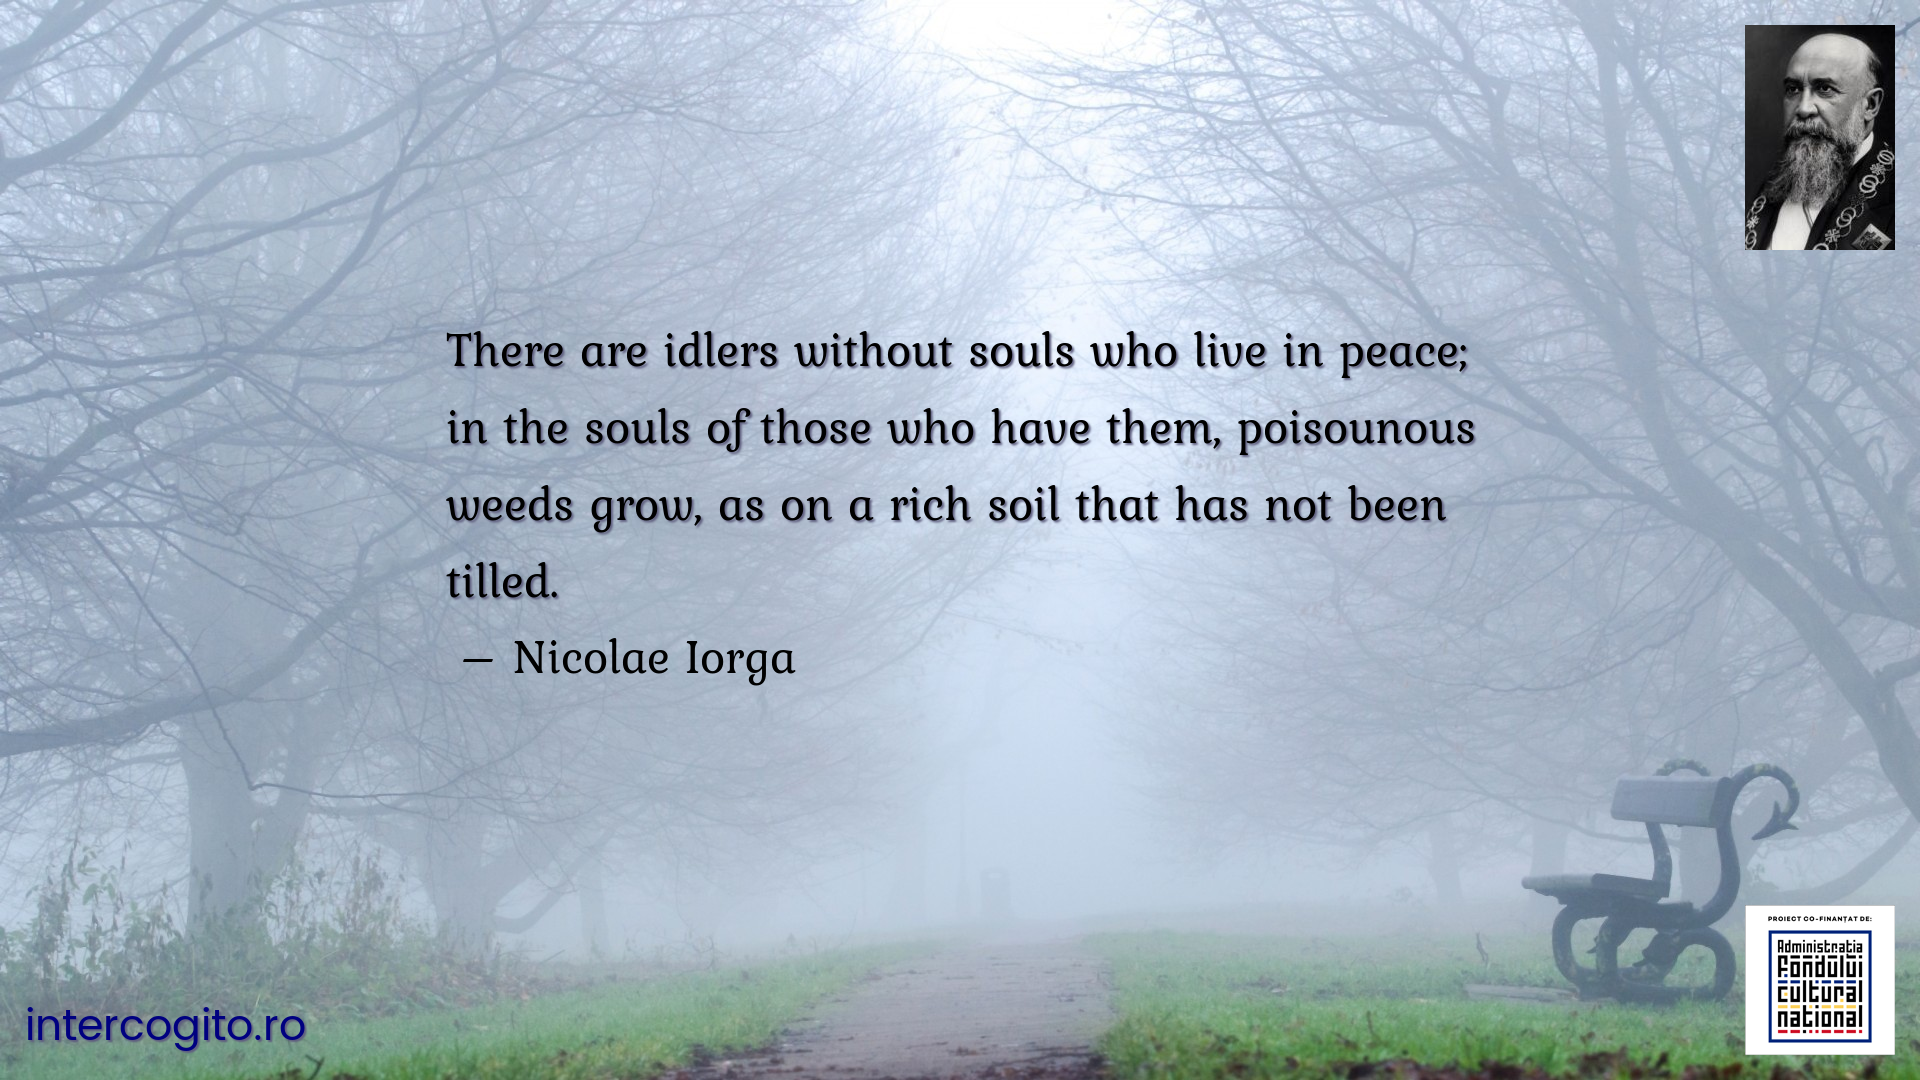 There are idlers without souls who live in peace; in the souls of those who have them, poisounous weeds grow, as on a rich soil that has not been tilled.